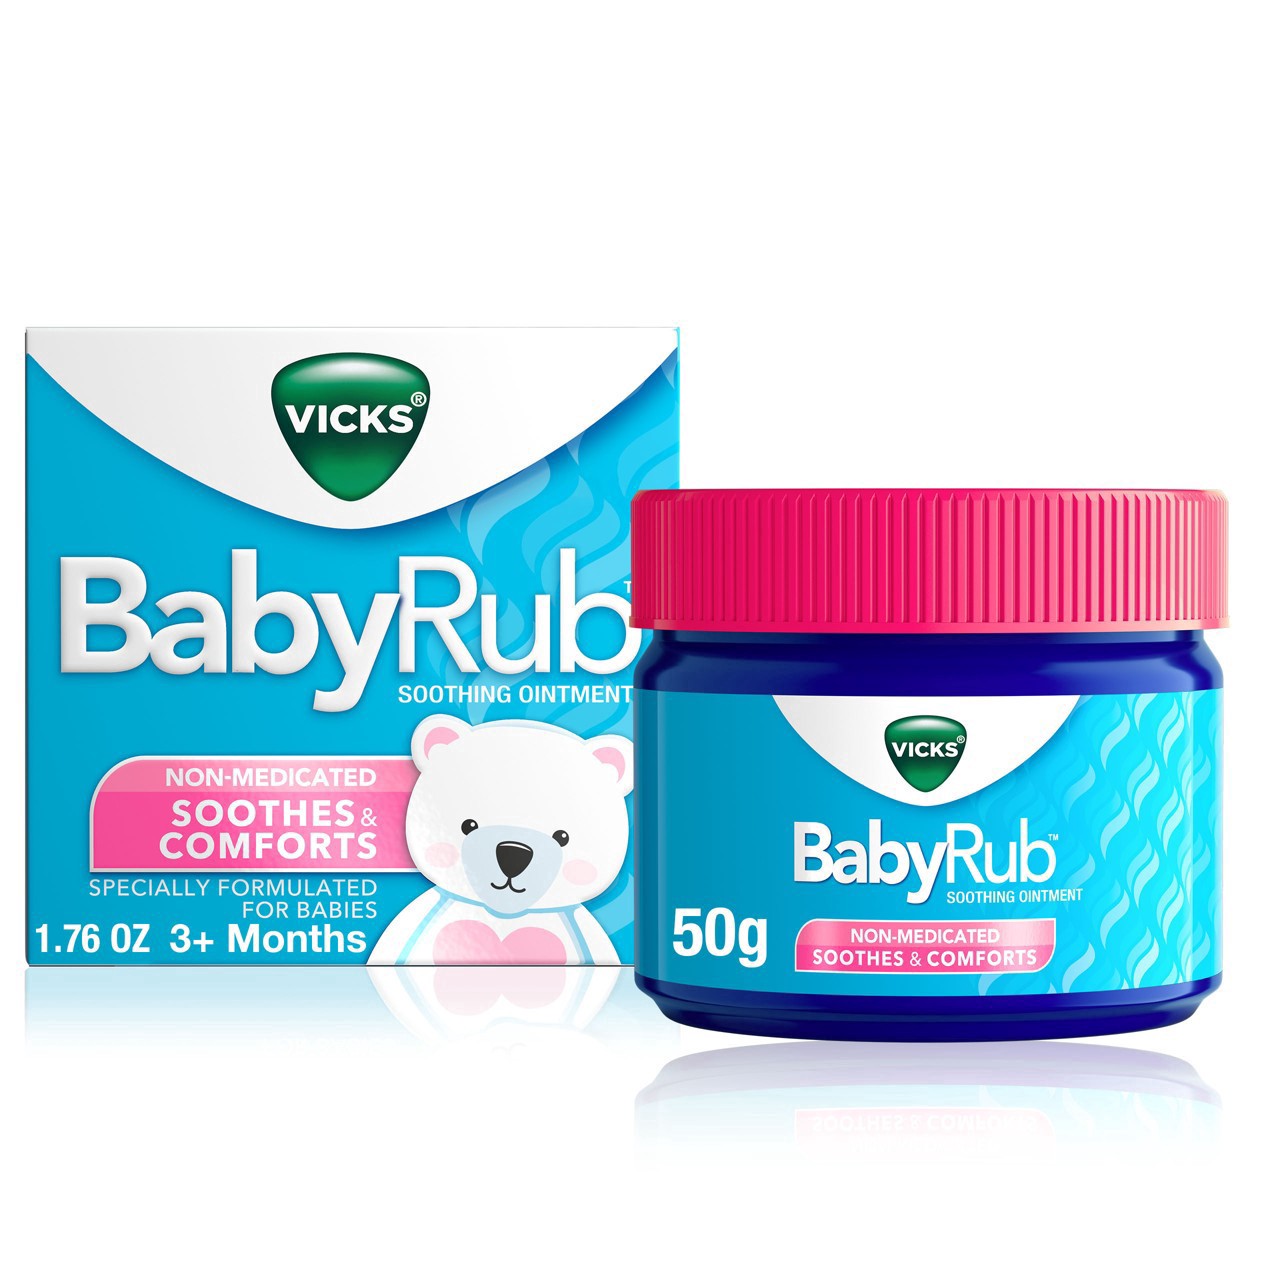 slide 50 of 78, Vicks BabyRub, Chest Rub Ointment with Soothing Aloe, Eucalyptus, Lavender, and Rosemary, from The Makers of VapoRub, 1.76 oz, 1.76 oz